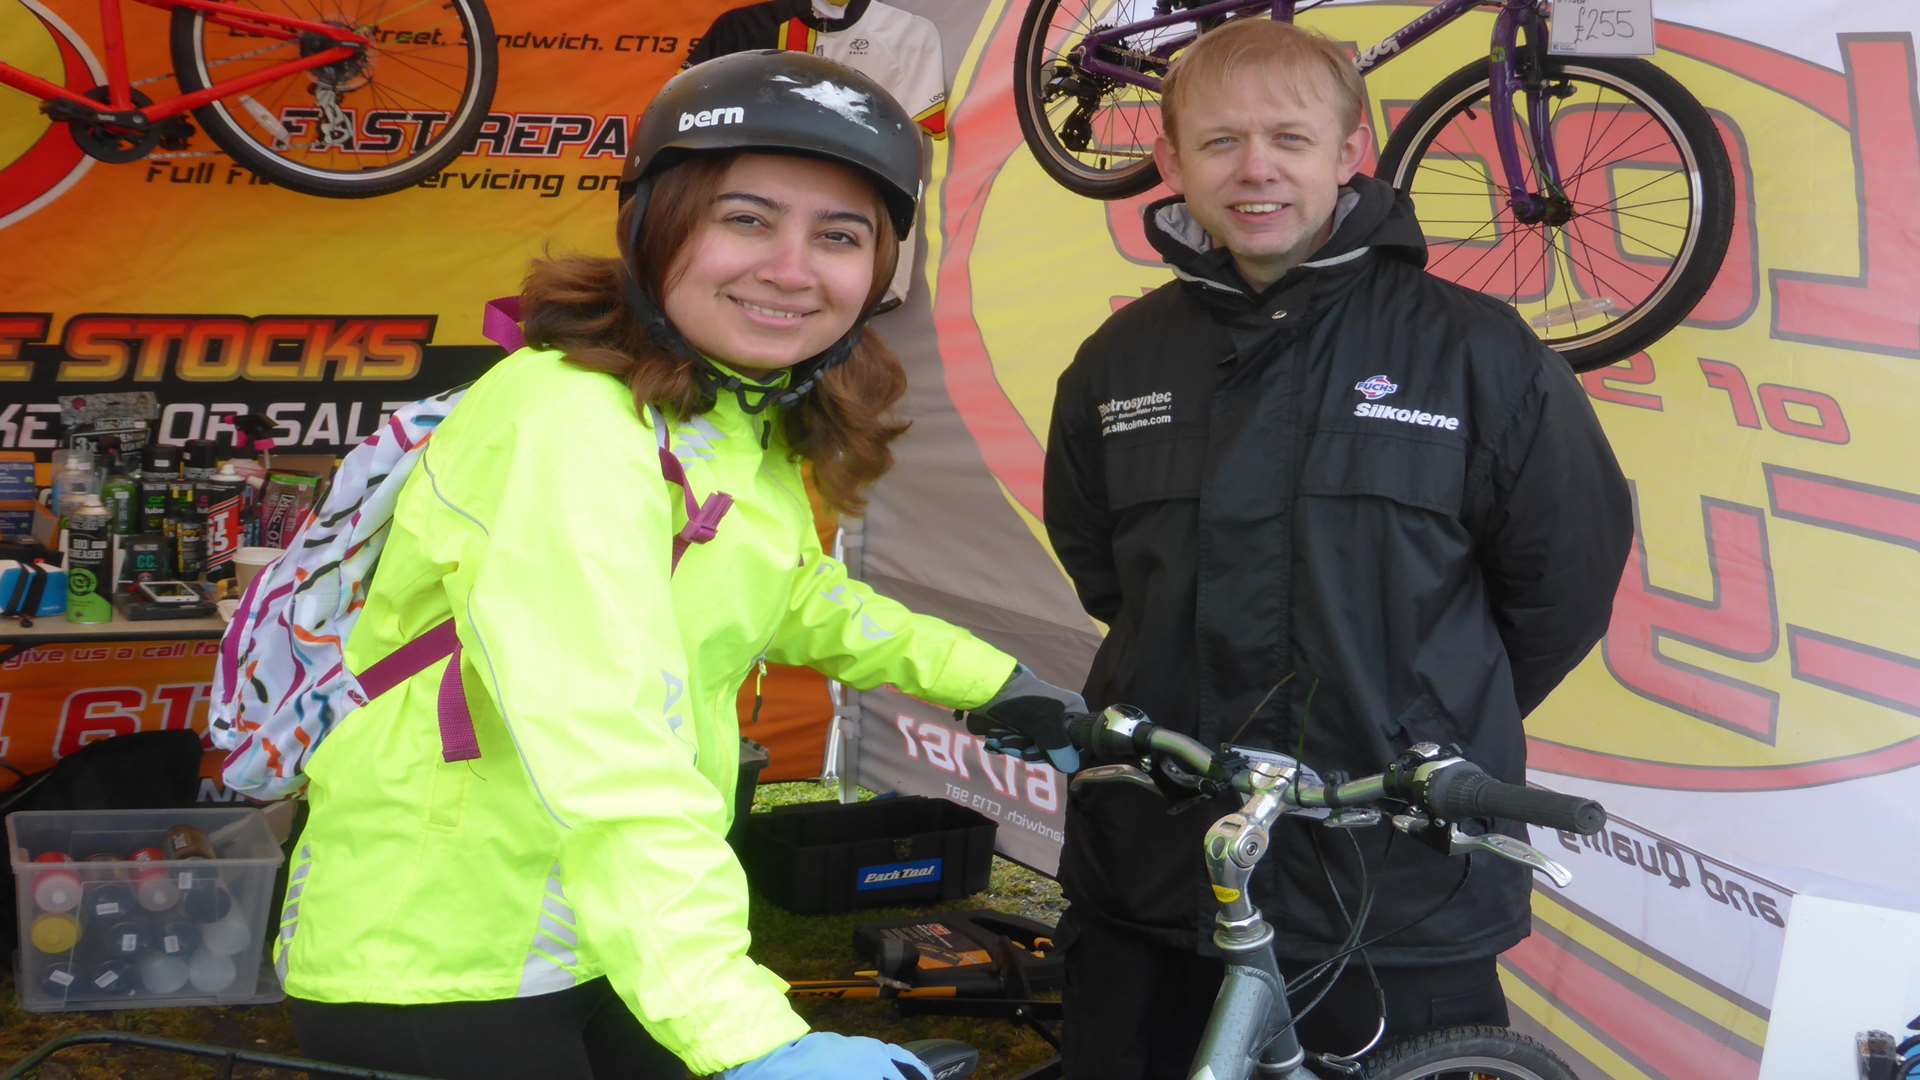 Martin Hayes of Locks of Sandwich Cycles provides maintenance to Sahar Naaseri's cycle at the KM Big Bike Ride. The KM Big Bike Ride attracted 370 riders taking part in either the 50km or 100km routes. Riders could take part for fun or for charity. £17k was raised for good causes.